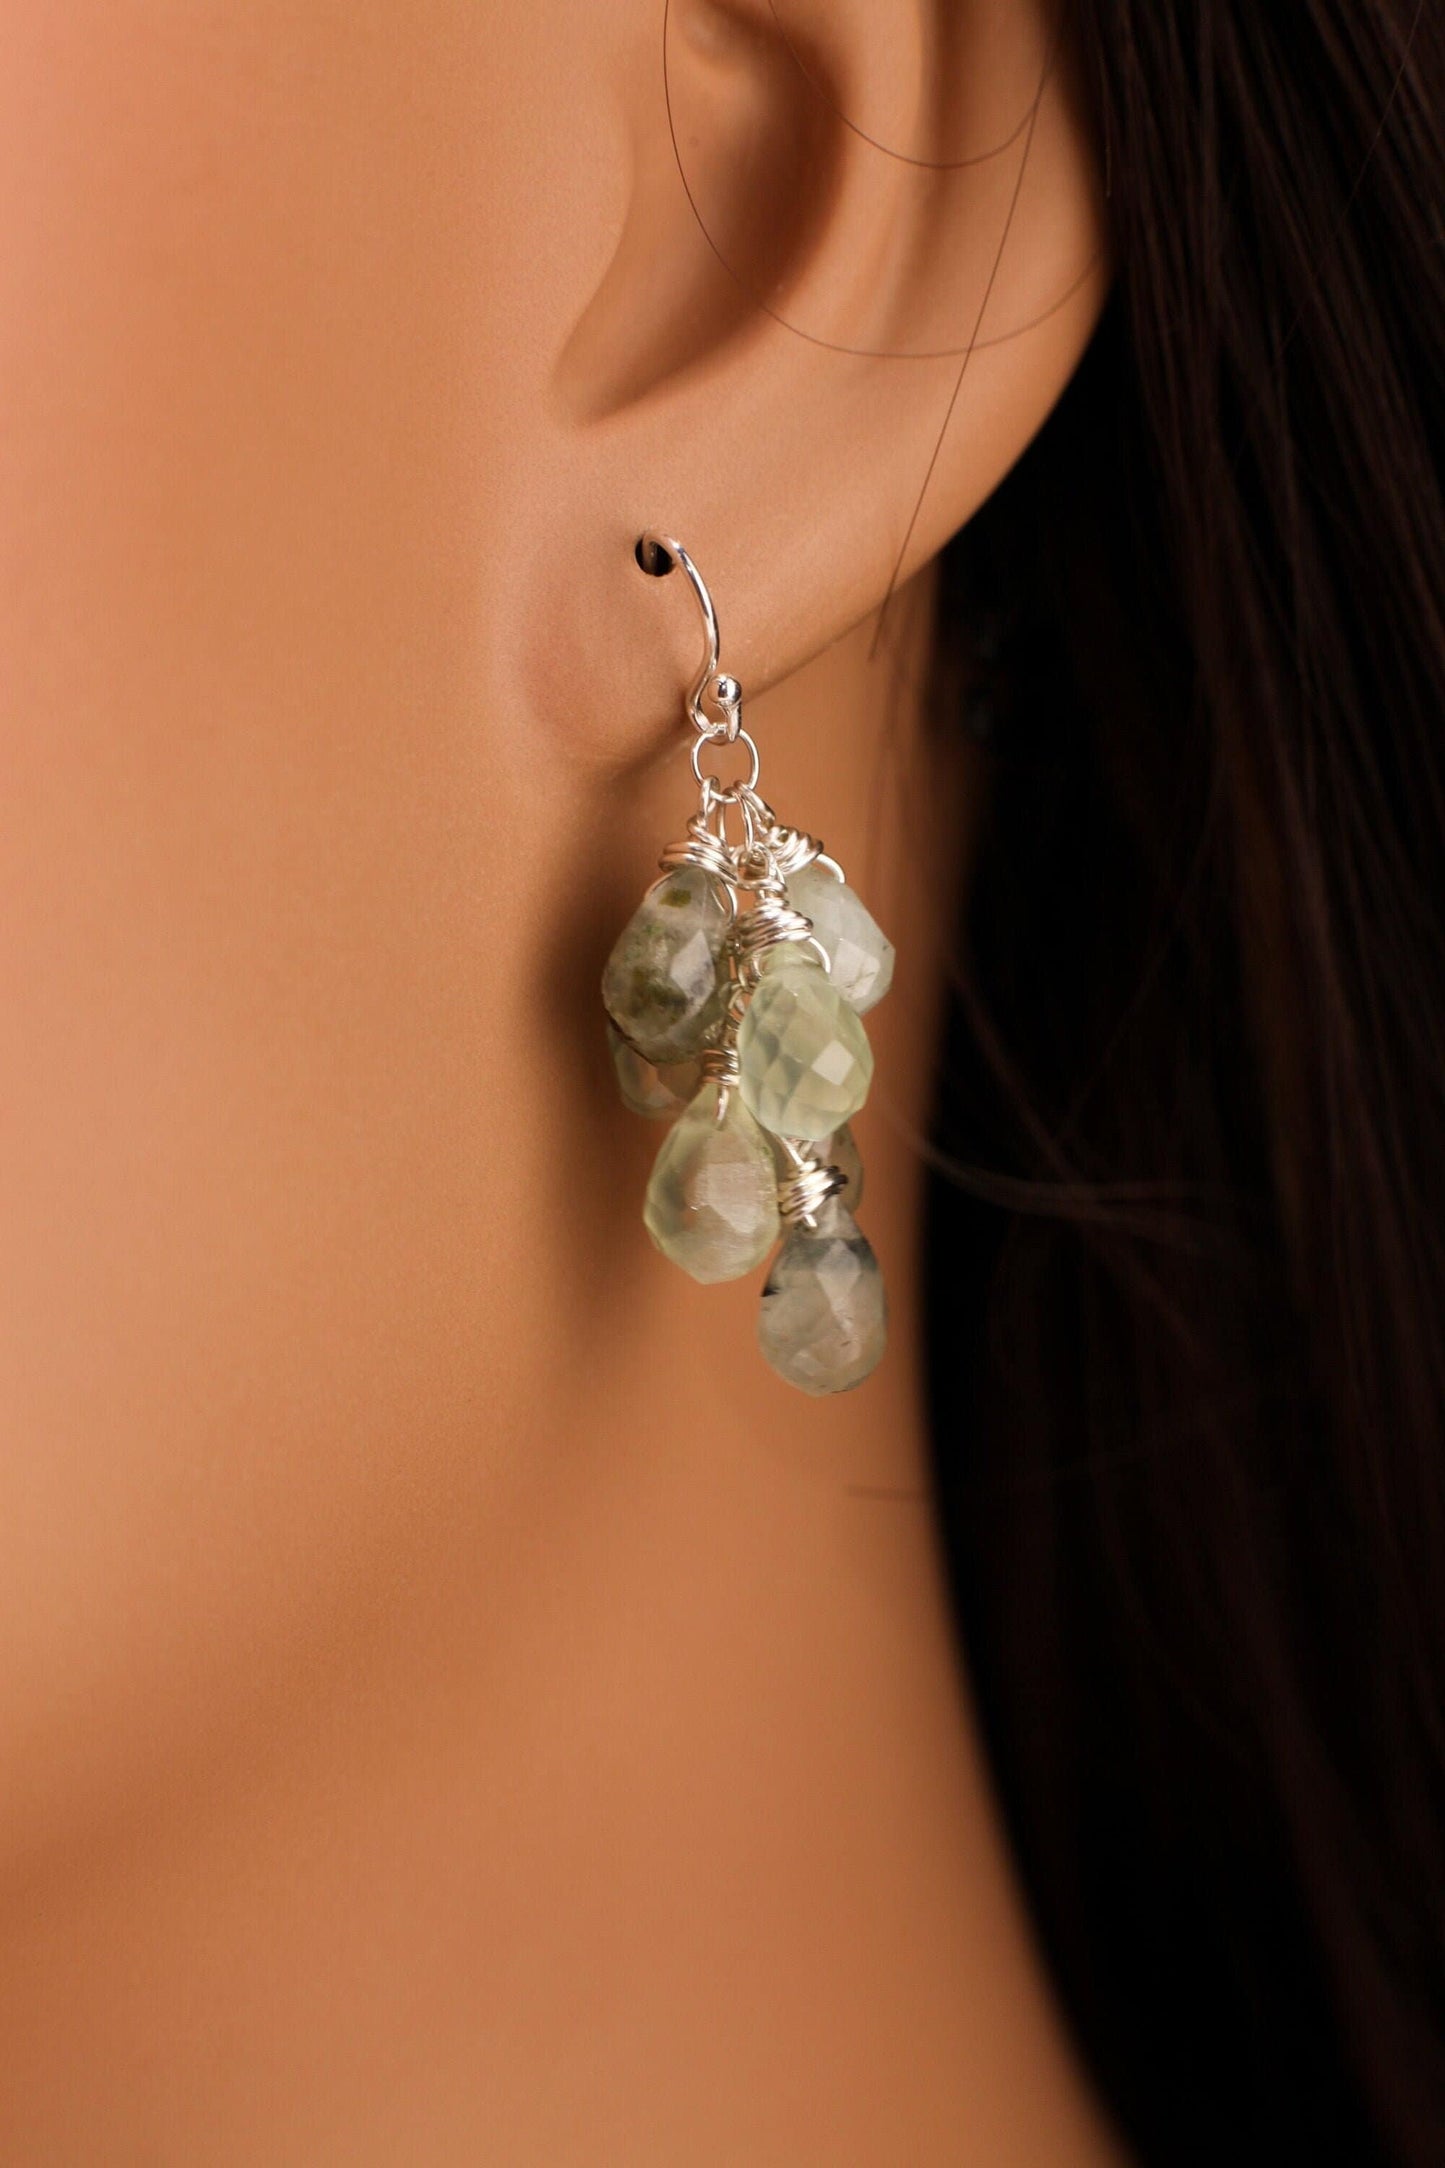 Natural Prehnite, Tourmalinated Quartz 6x9mm Faceted Briolette Drop Handmade Wire Wrap in Sterling Silver Earring